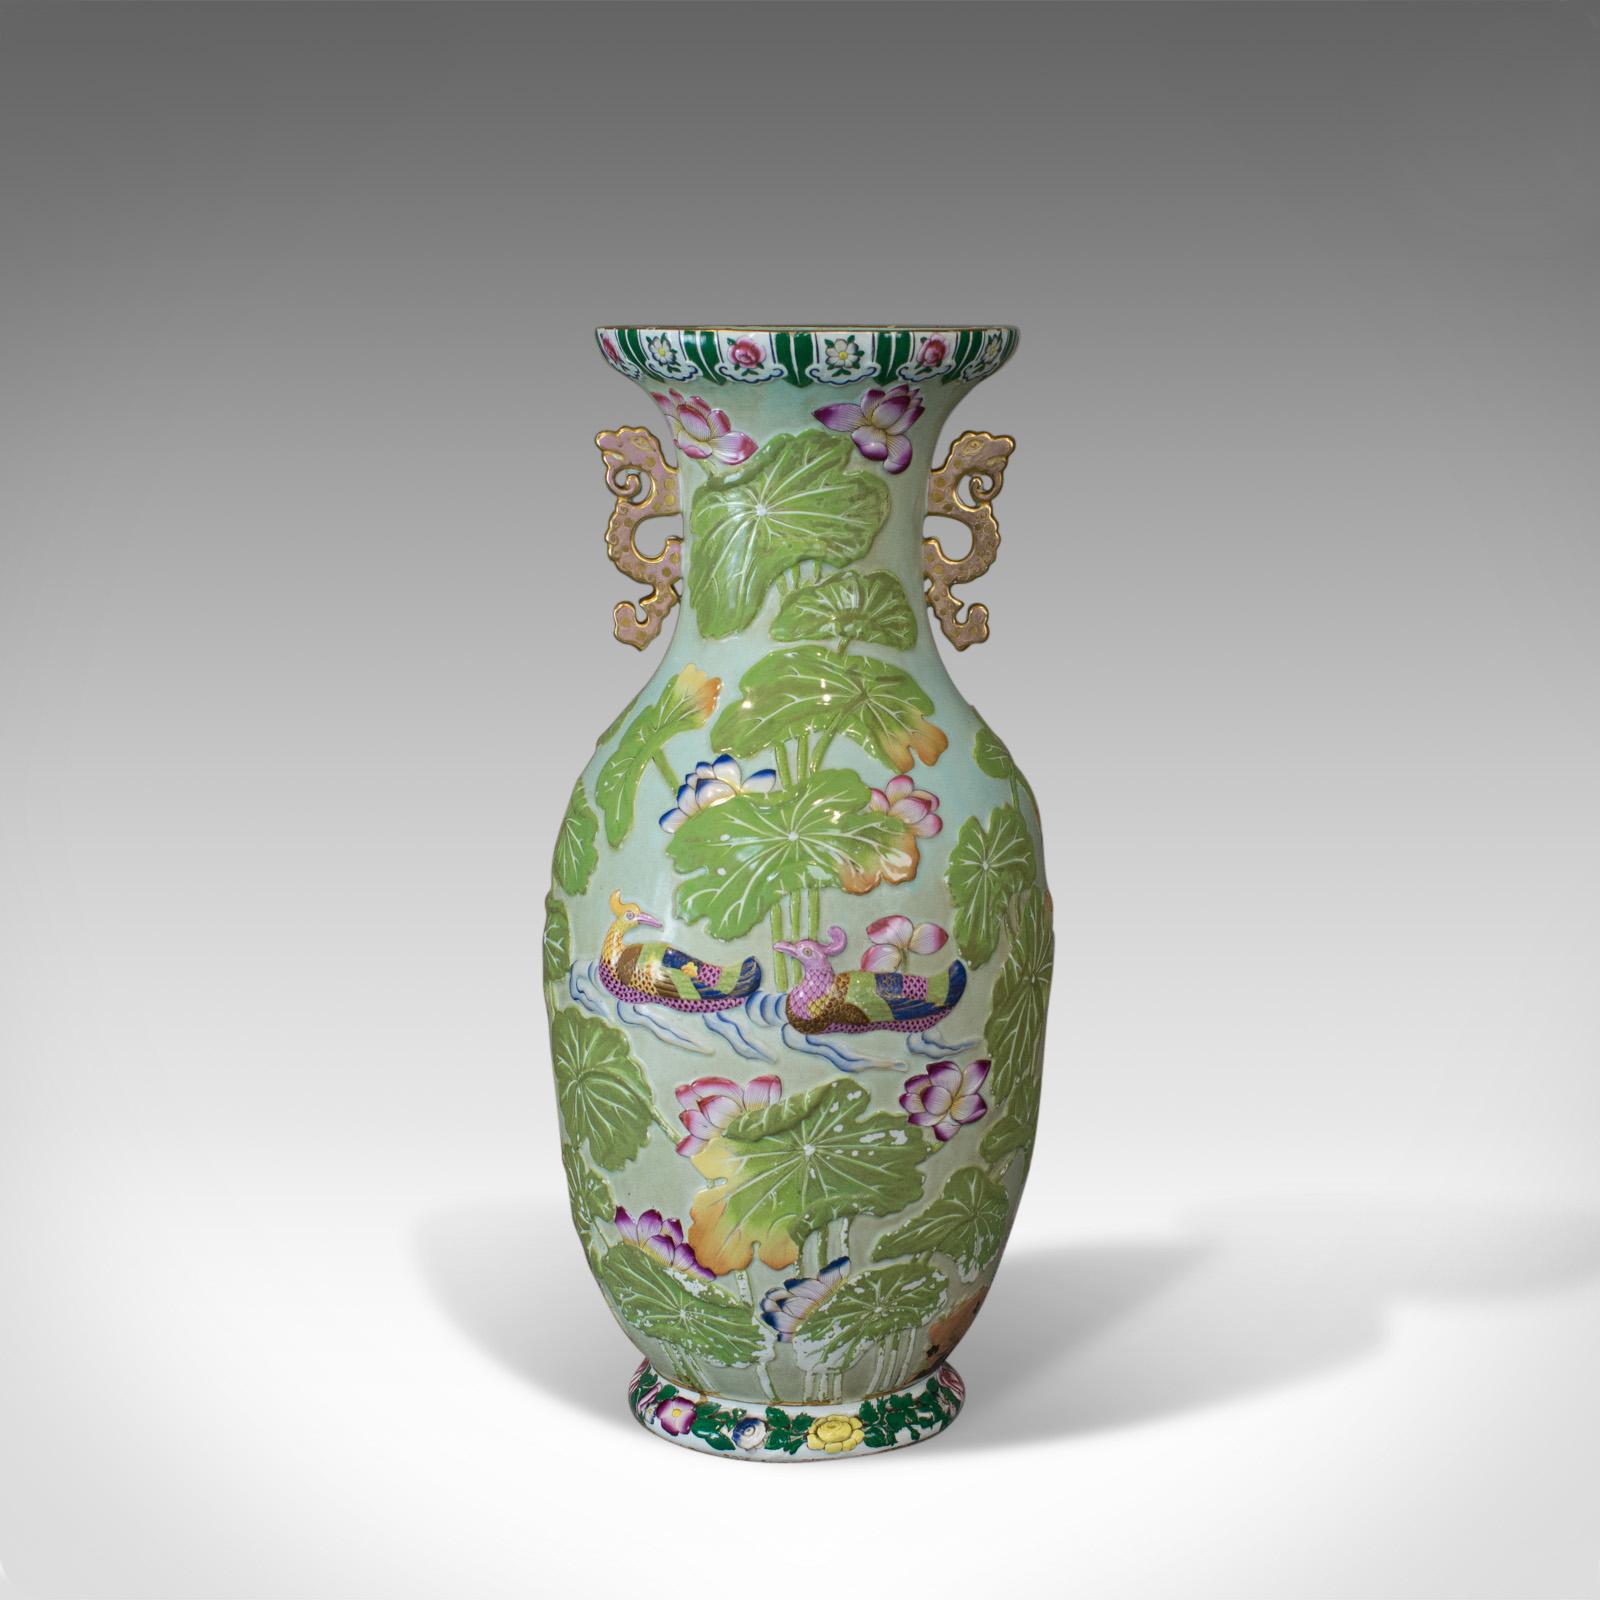 This is a large vintage baluster vase. An Oriental ceramic urn with floral and foliate decoration dating to the mid-late 20th century.

Of classic form and in good proportion
Of quality craftsmanship, free from damage
Unmarked base displays some